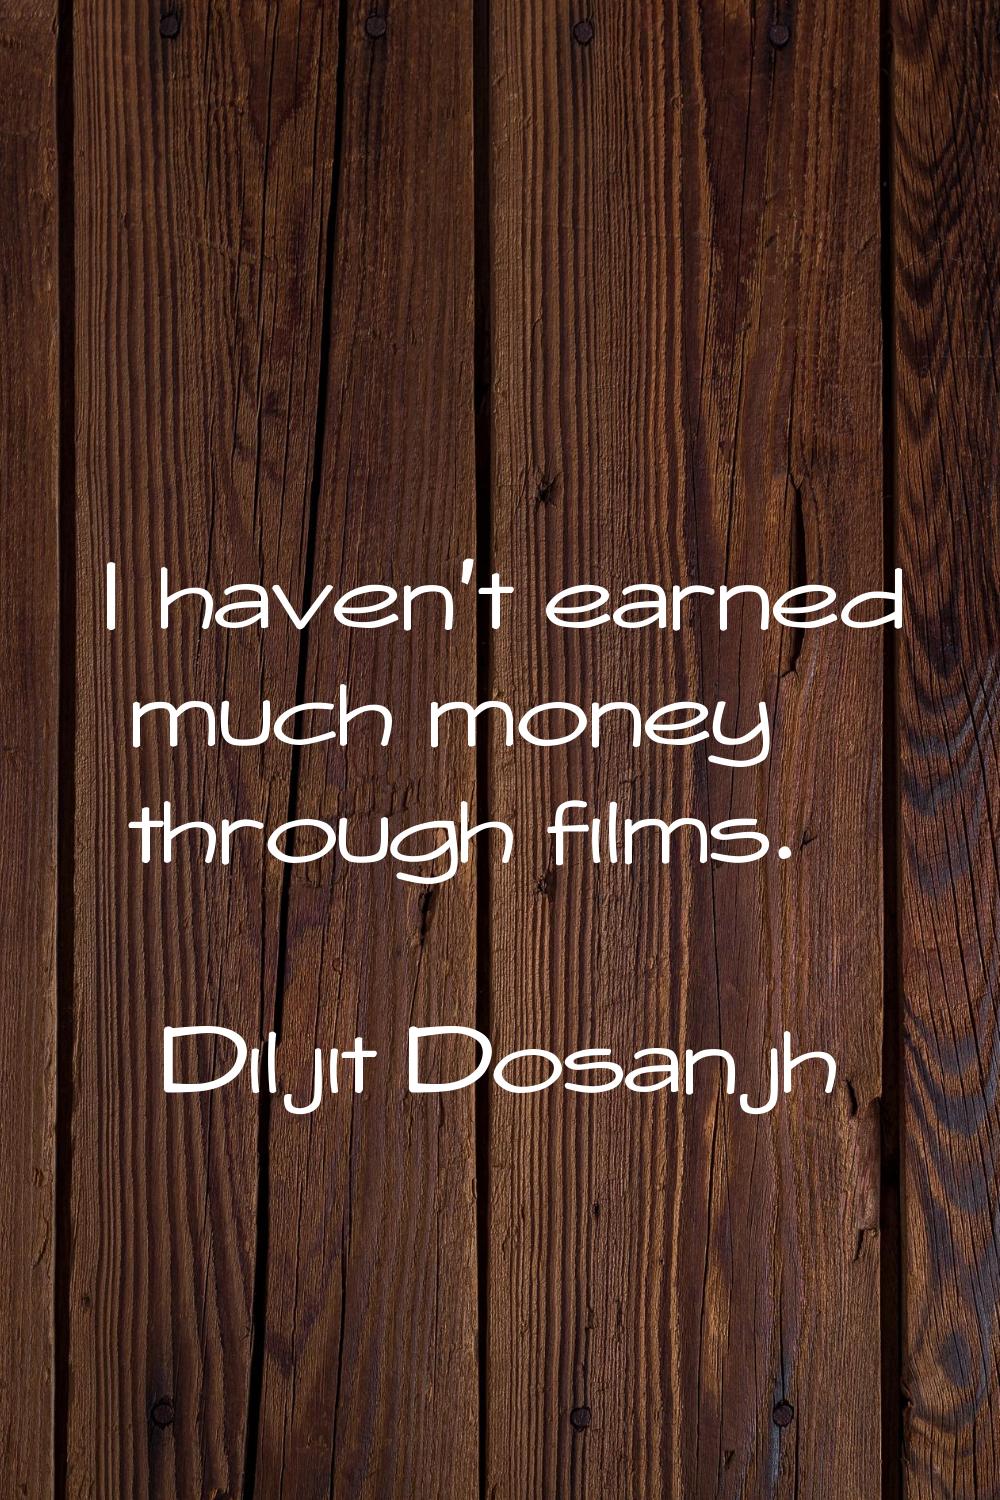 I haven't earned much money through films.